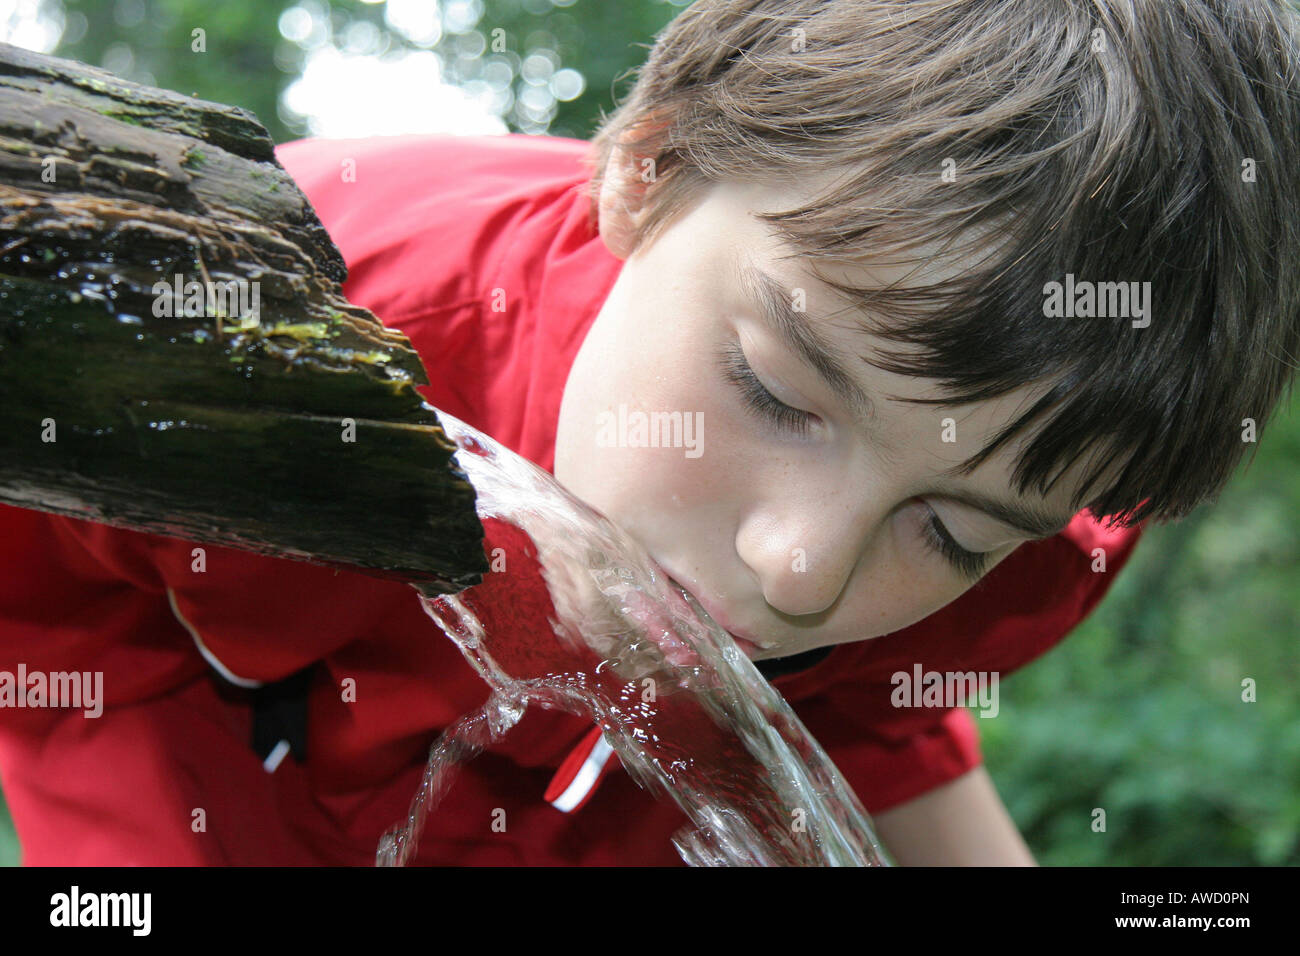 Young boy drinks water from a well Stock Photo